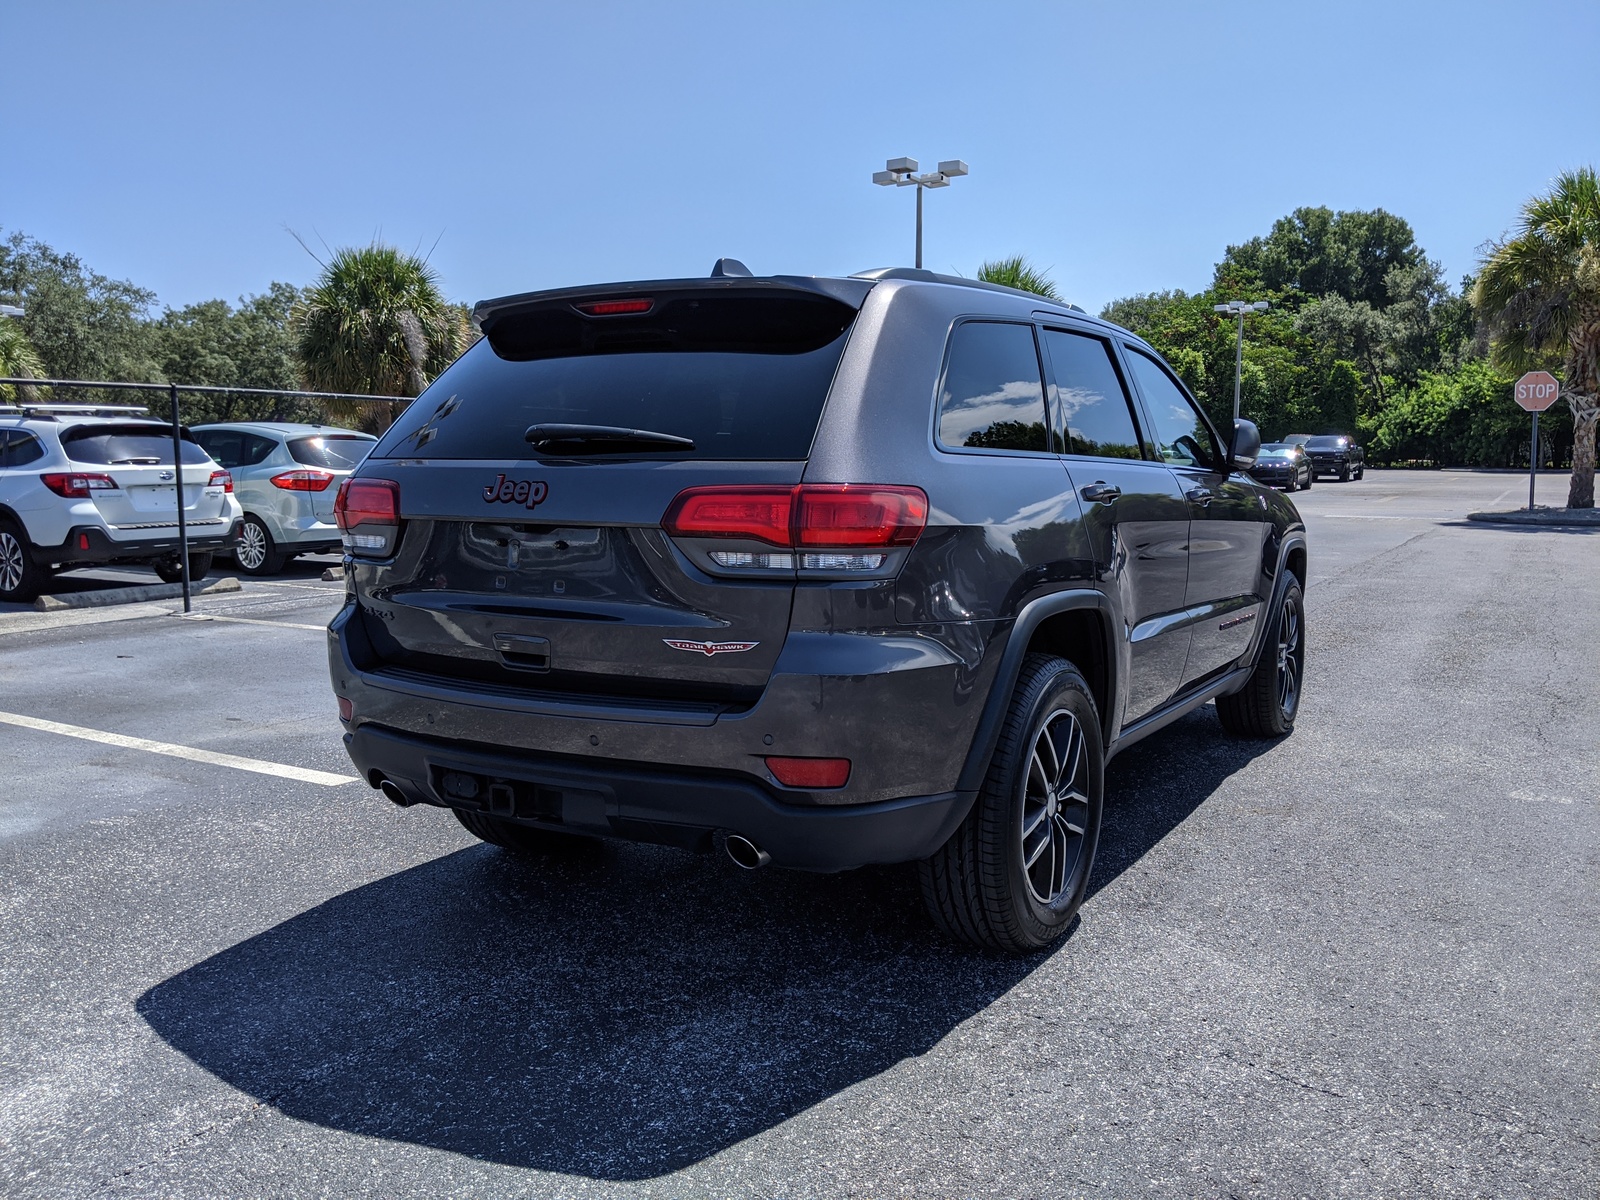 PreOwned 2017 Jeep Grand Cherokee Trailhawk 4×4 With